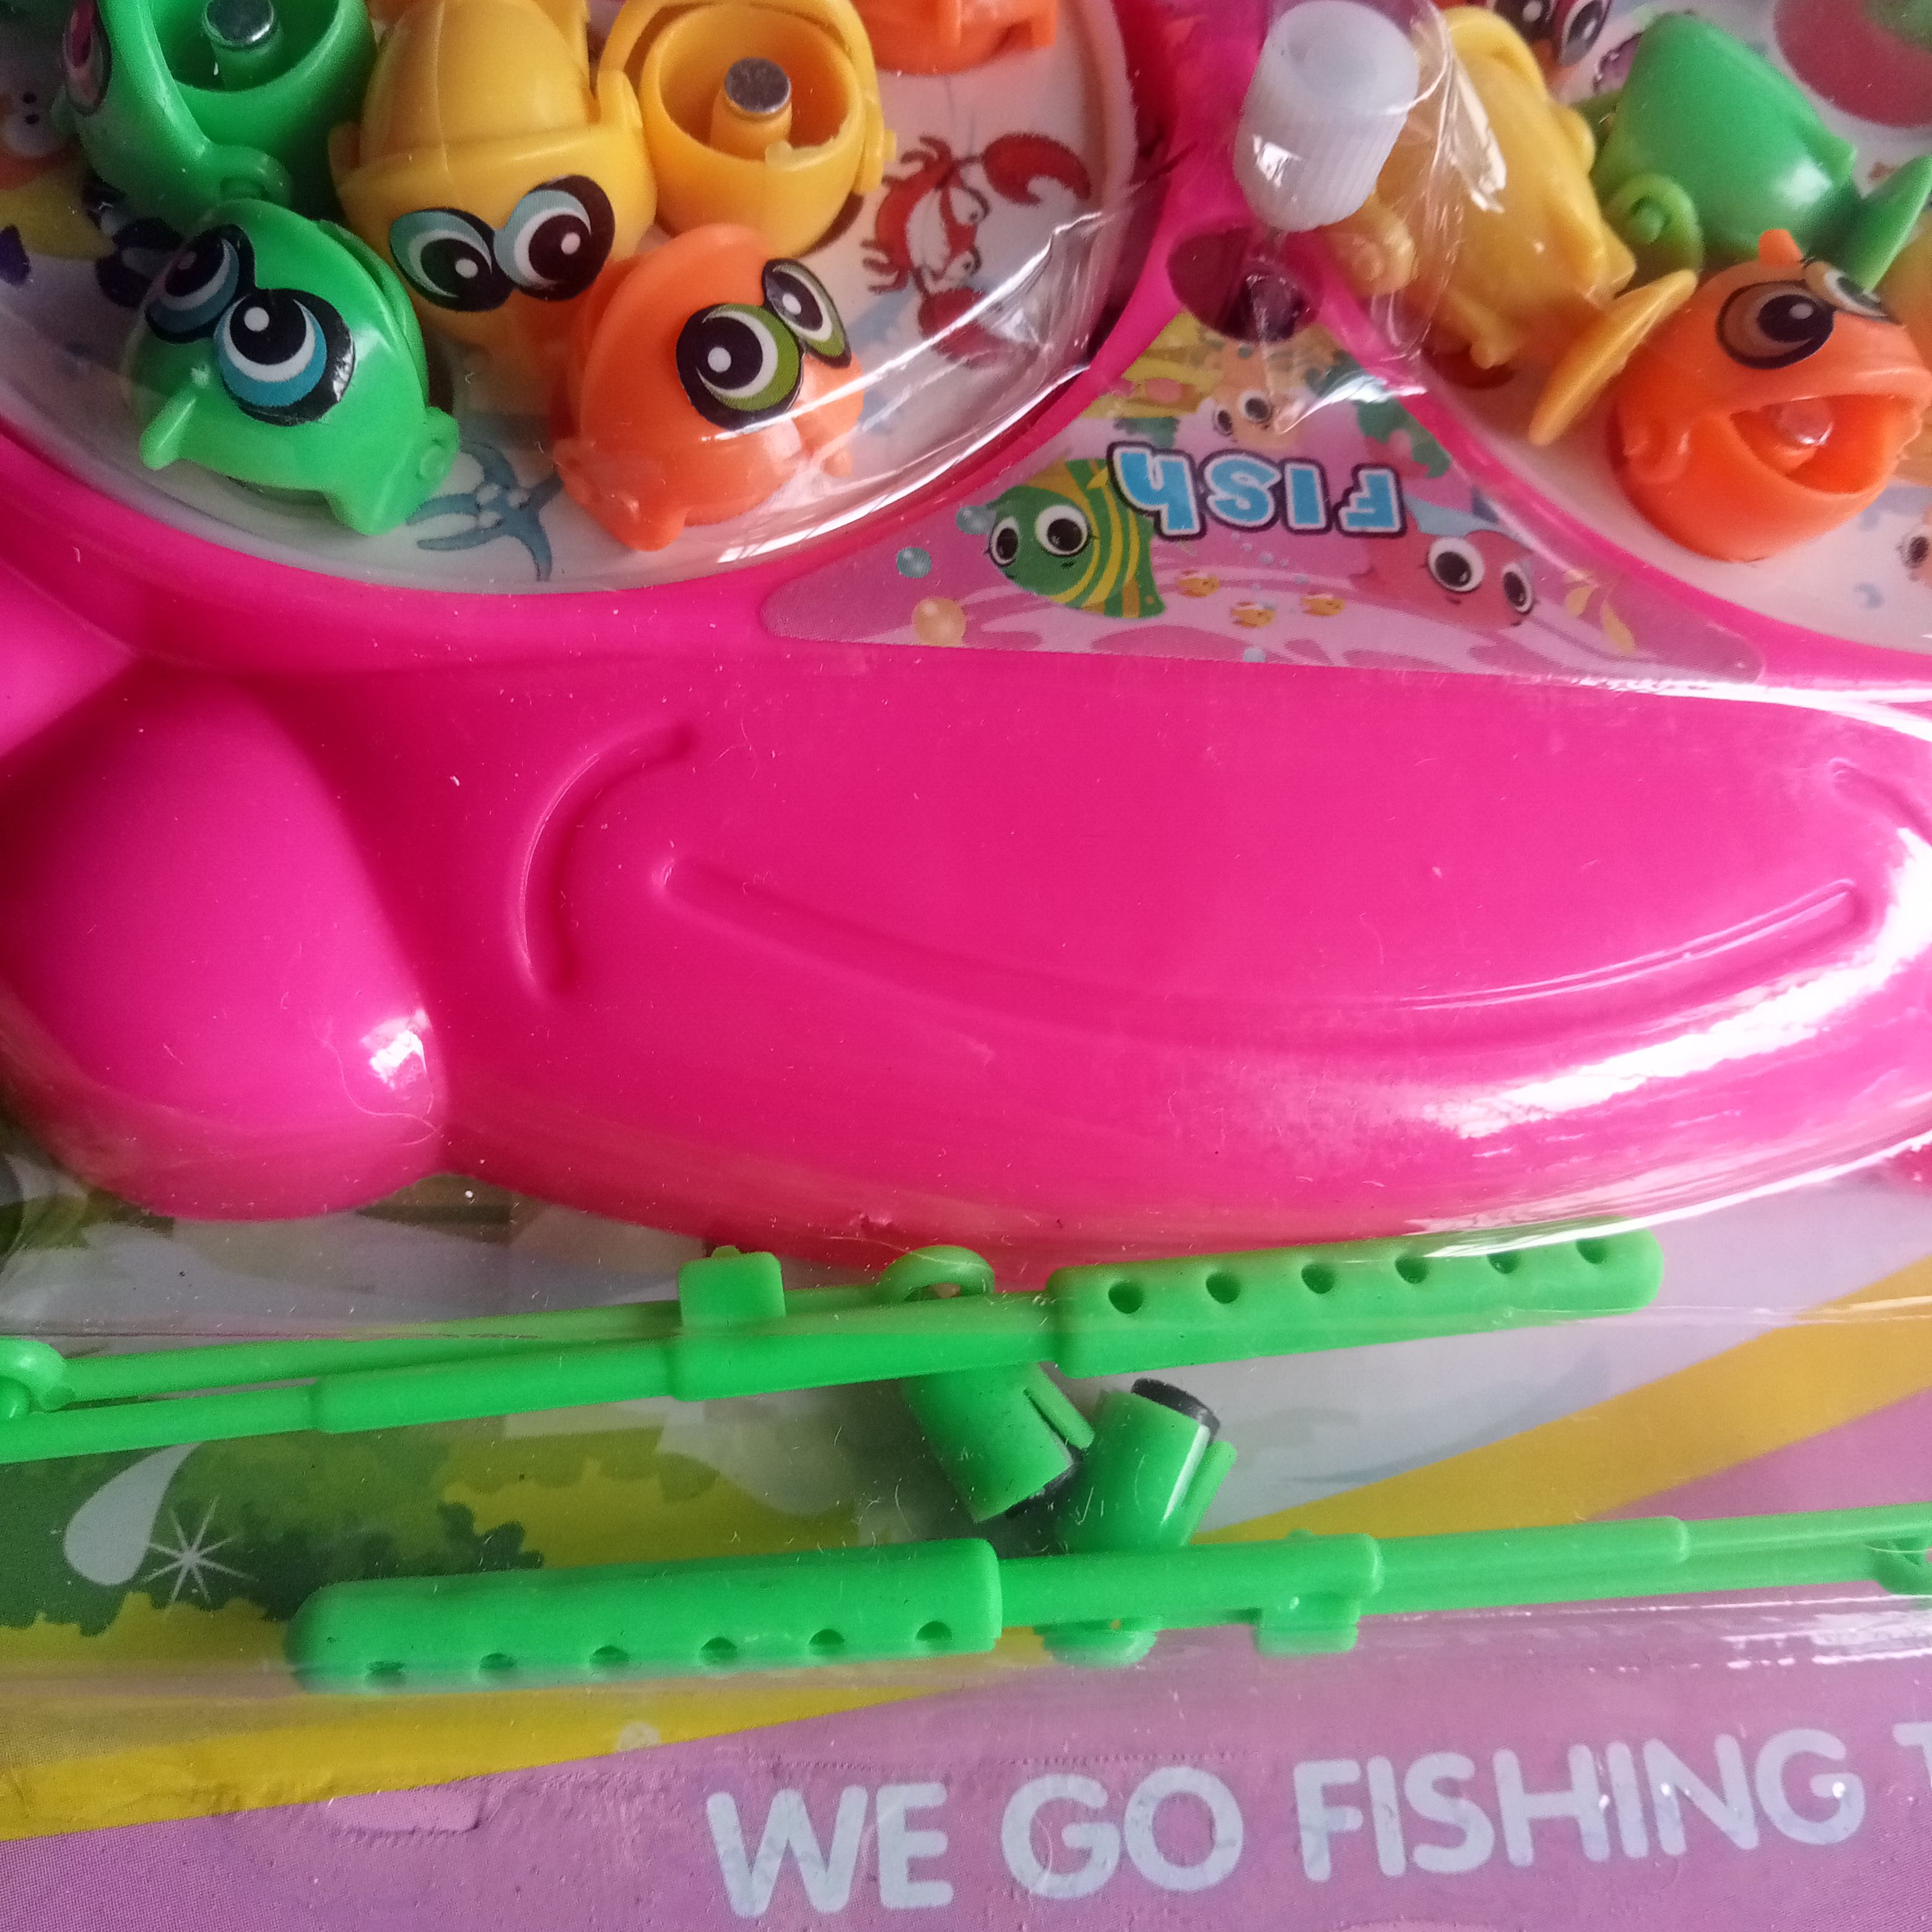 Happy Game Fishing with Magnetic Fish and Rods Toys for Kids